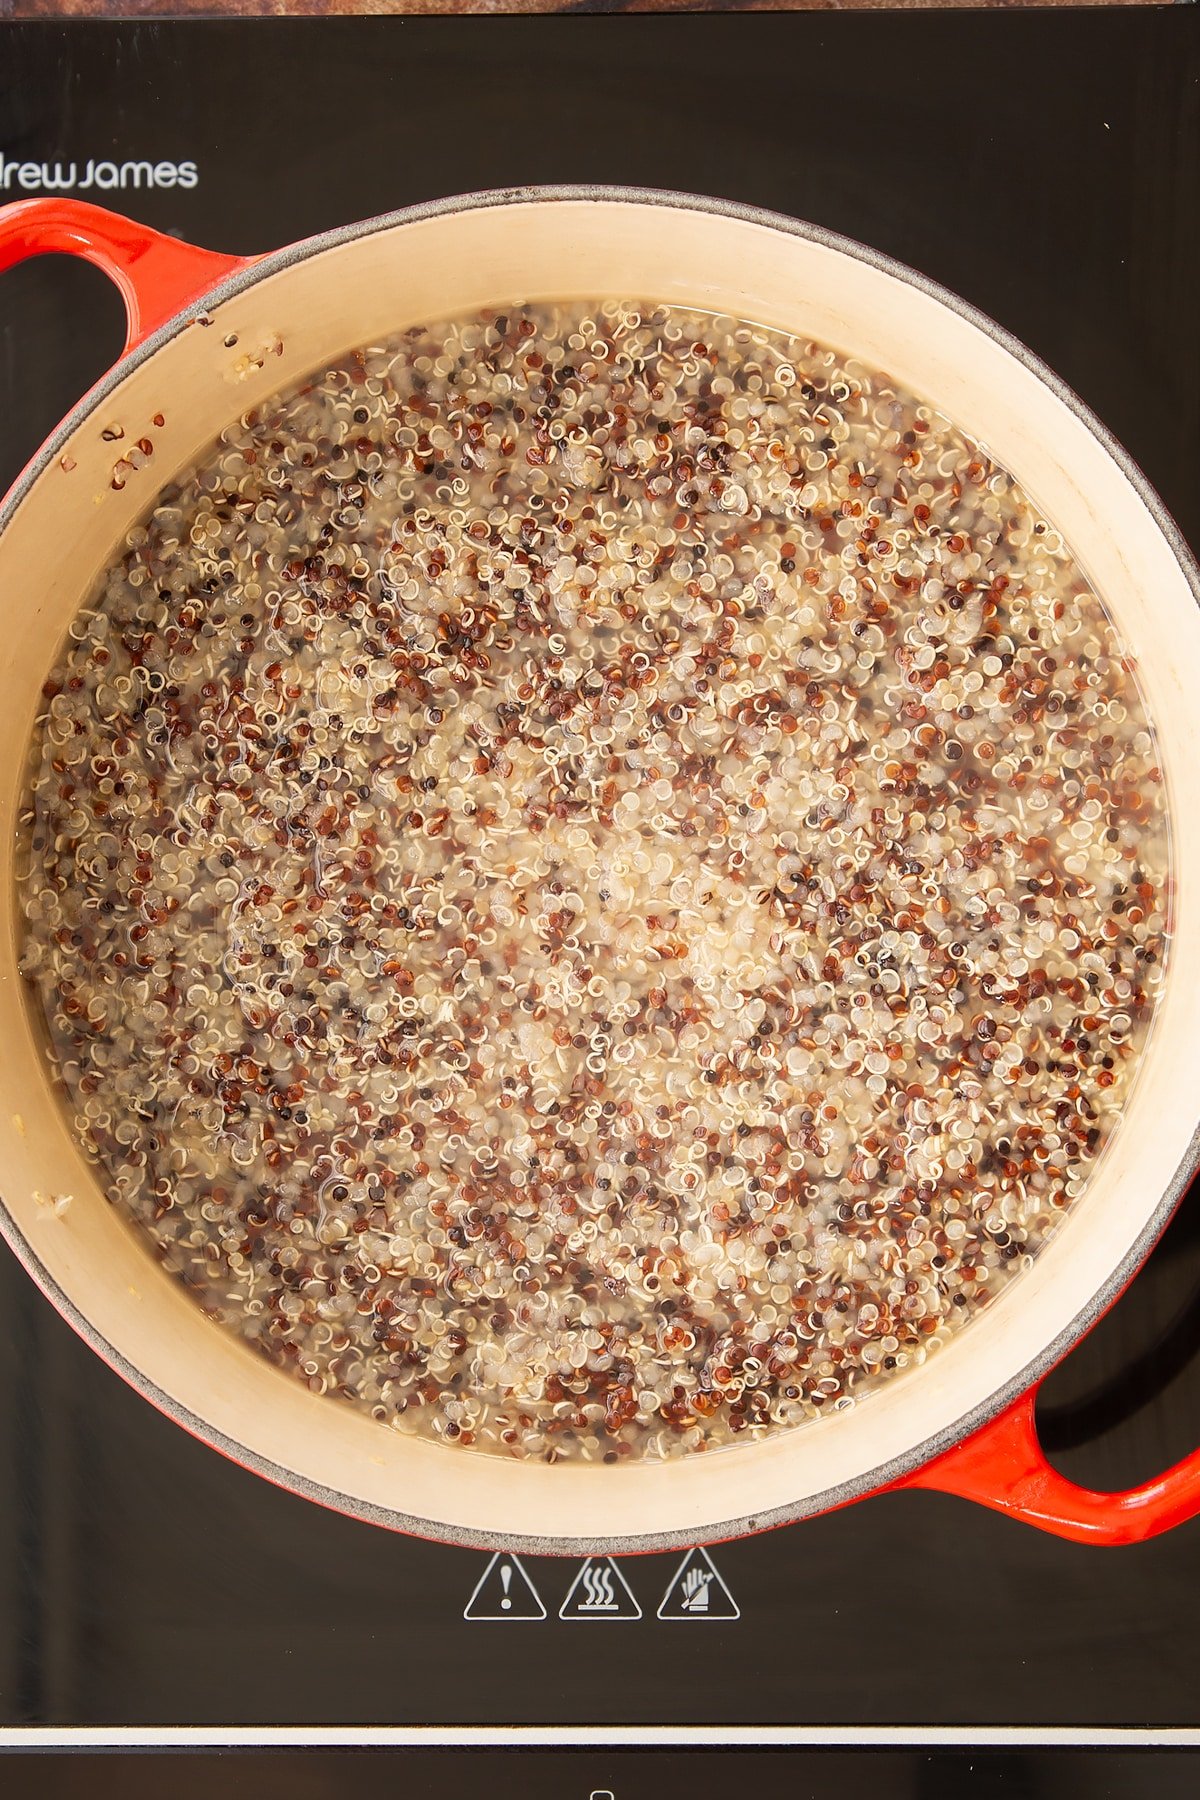 Overhead shot of the cooked quinoa in a pan on the hob.